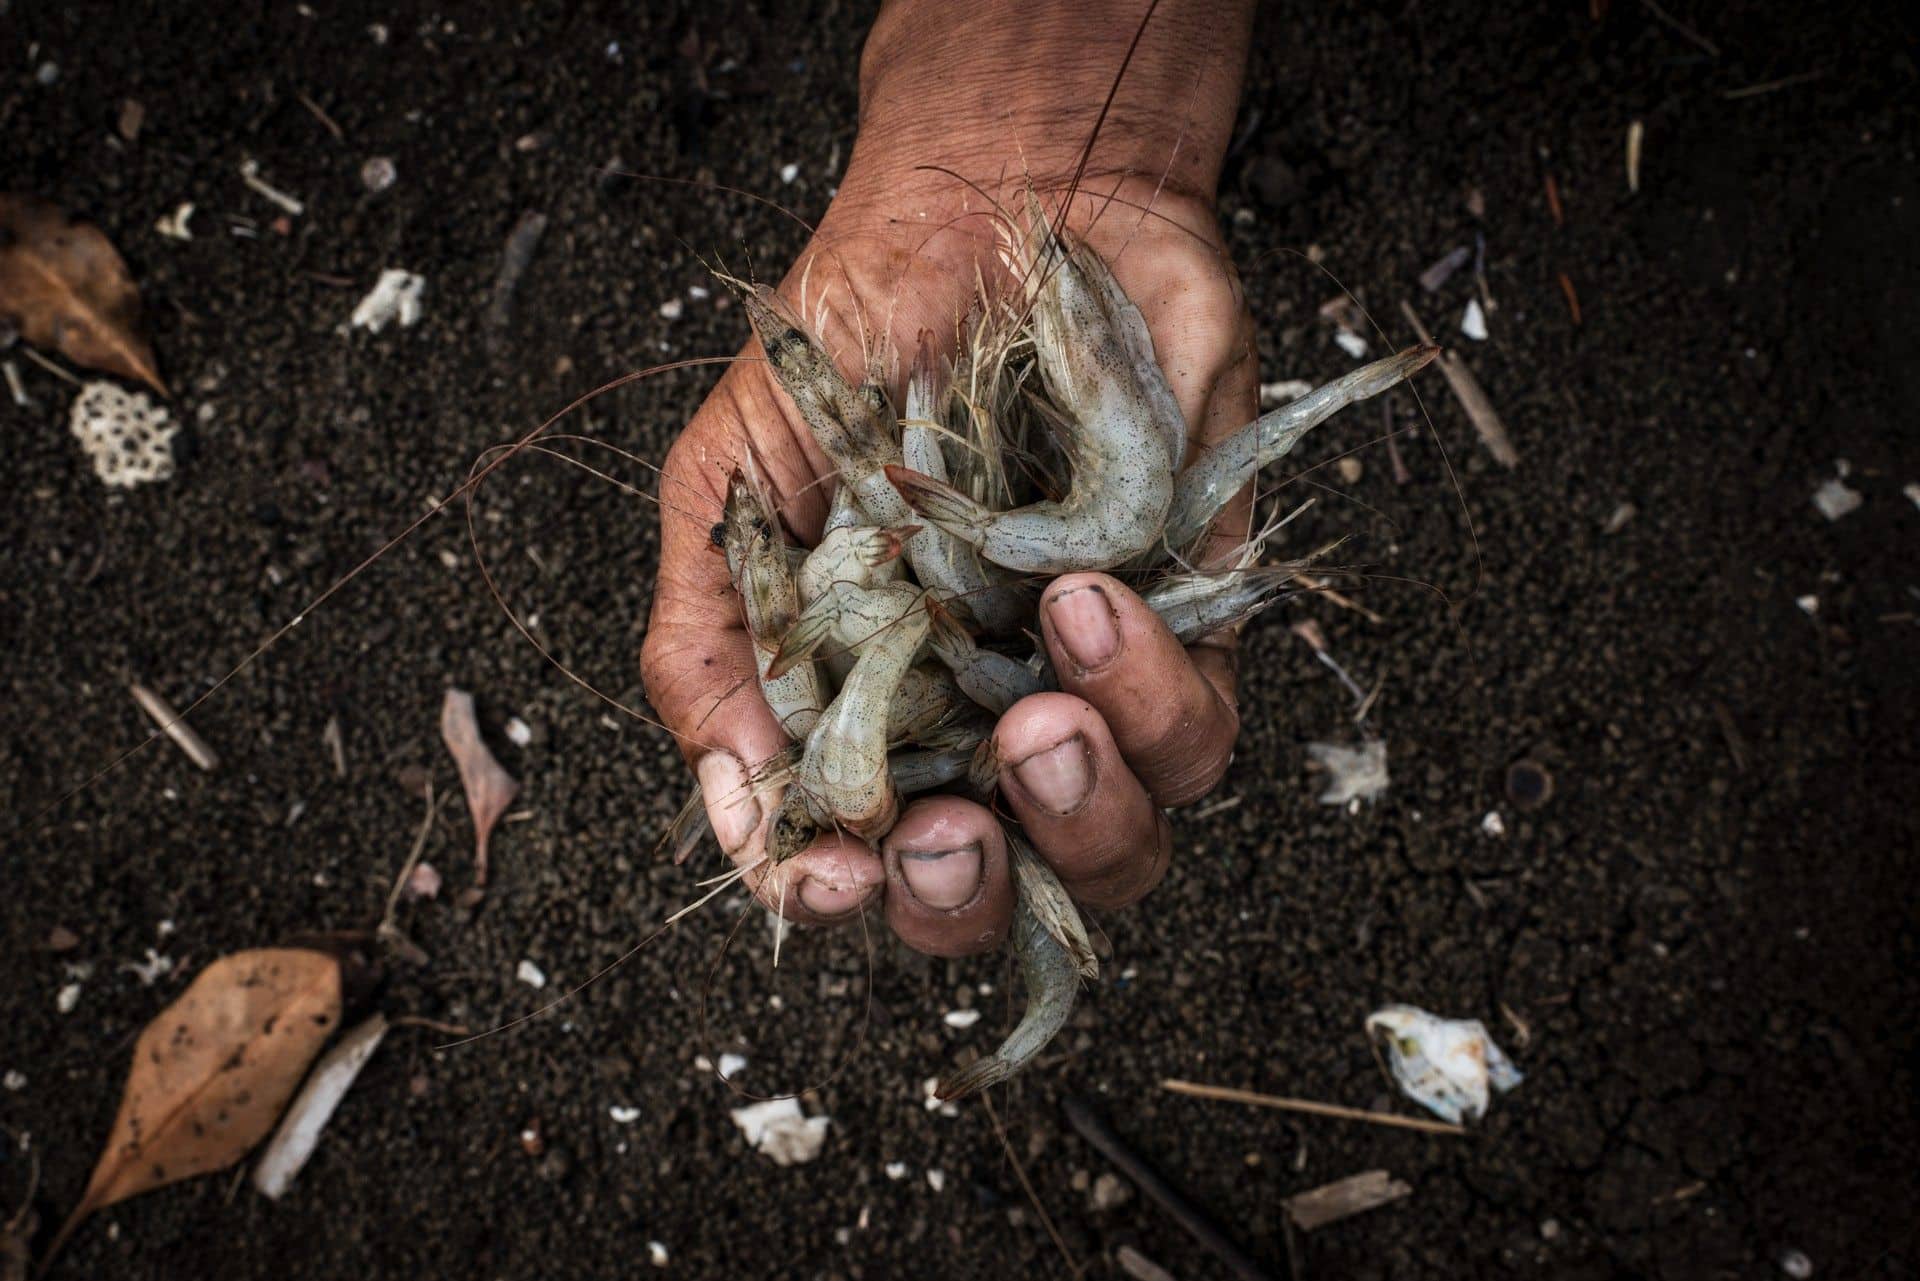 A fistful of shrimp in Indonesia